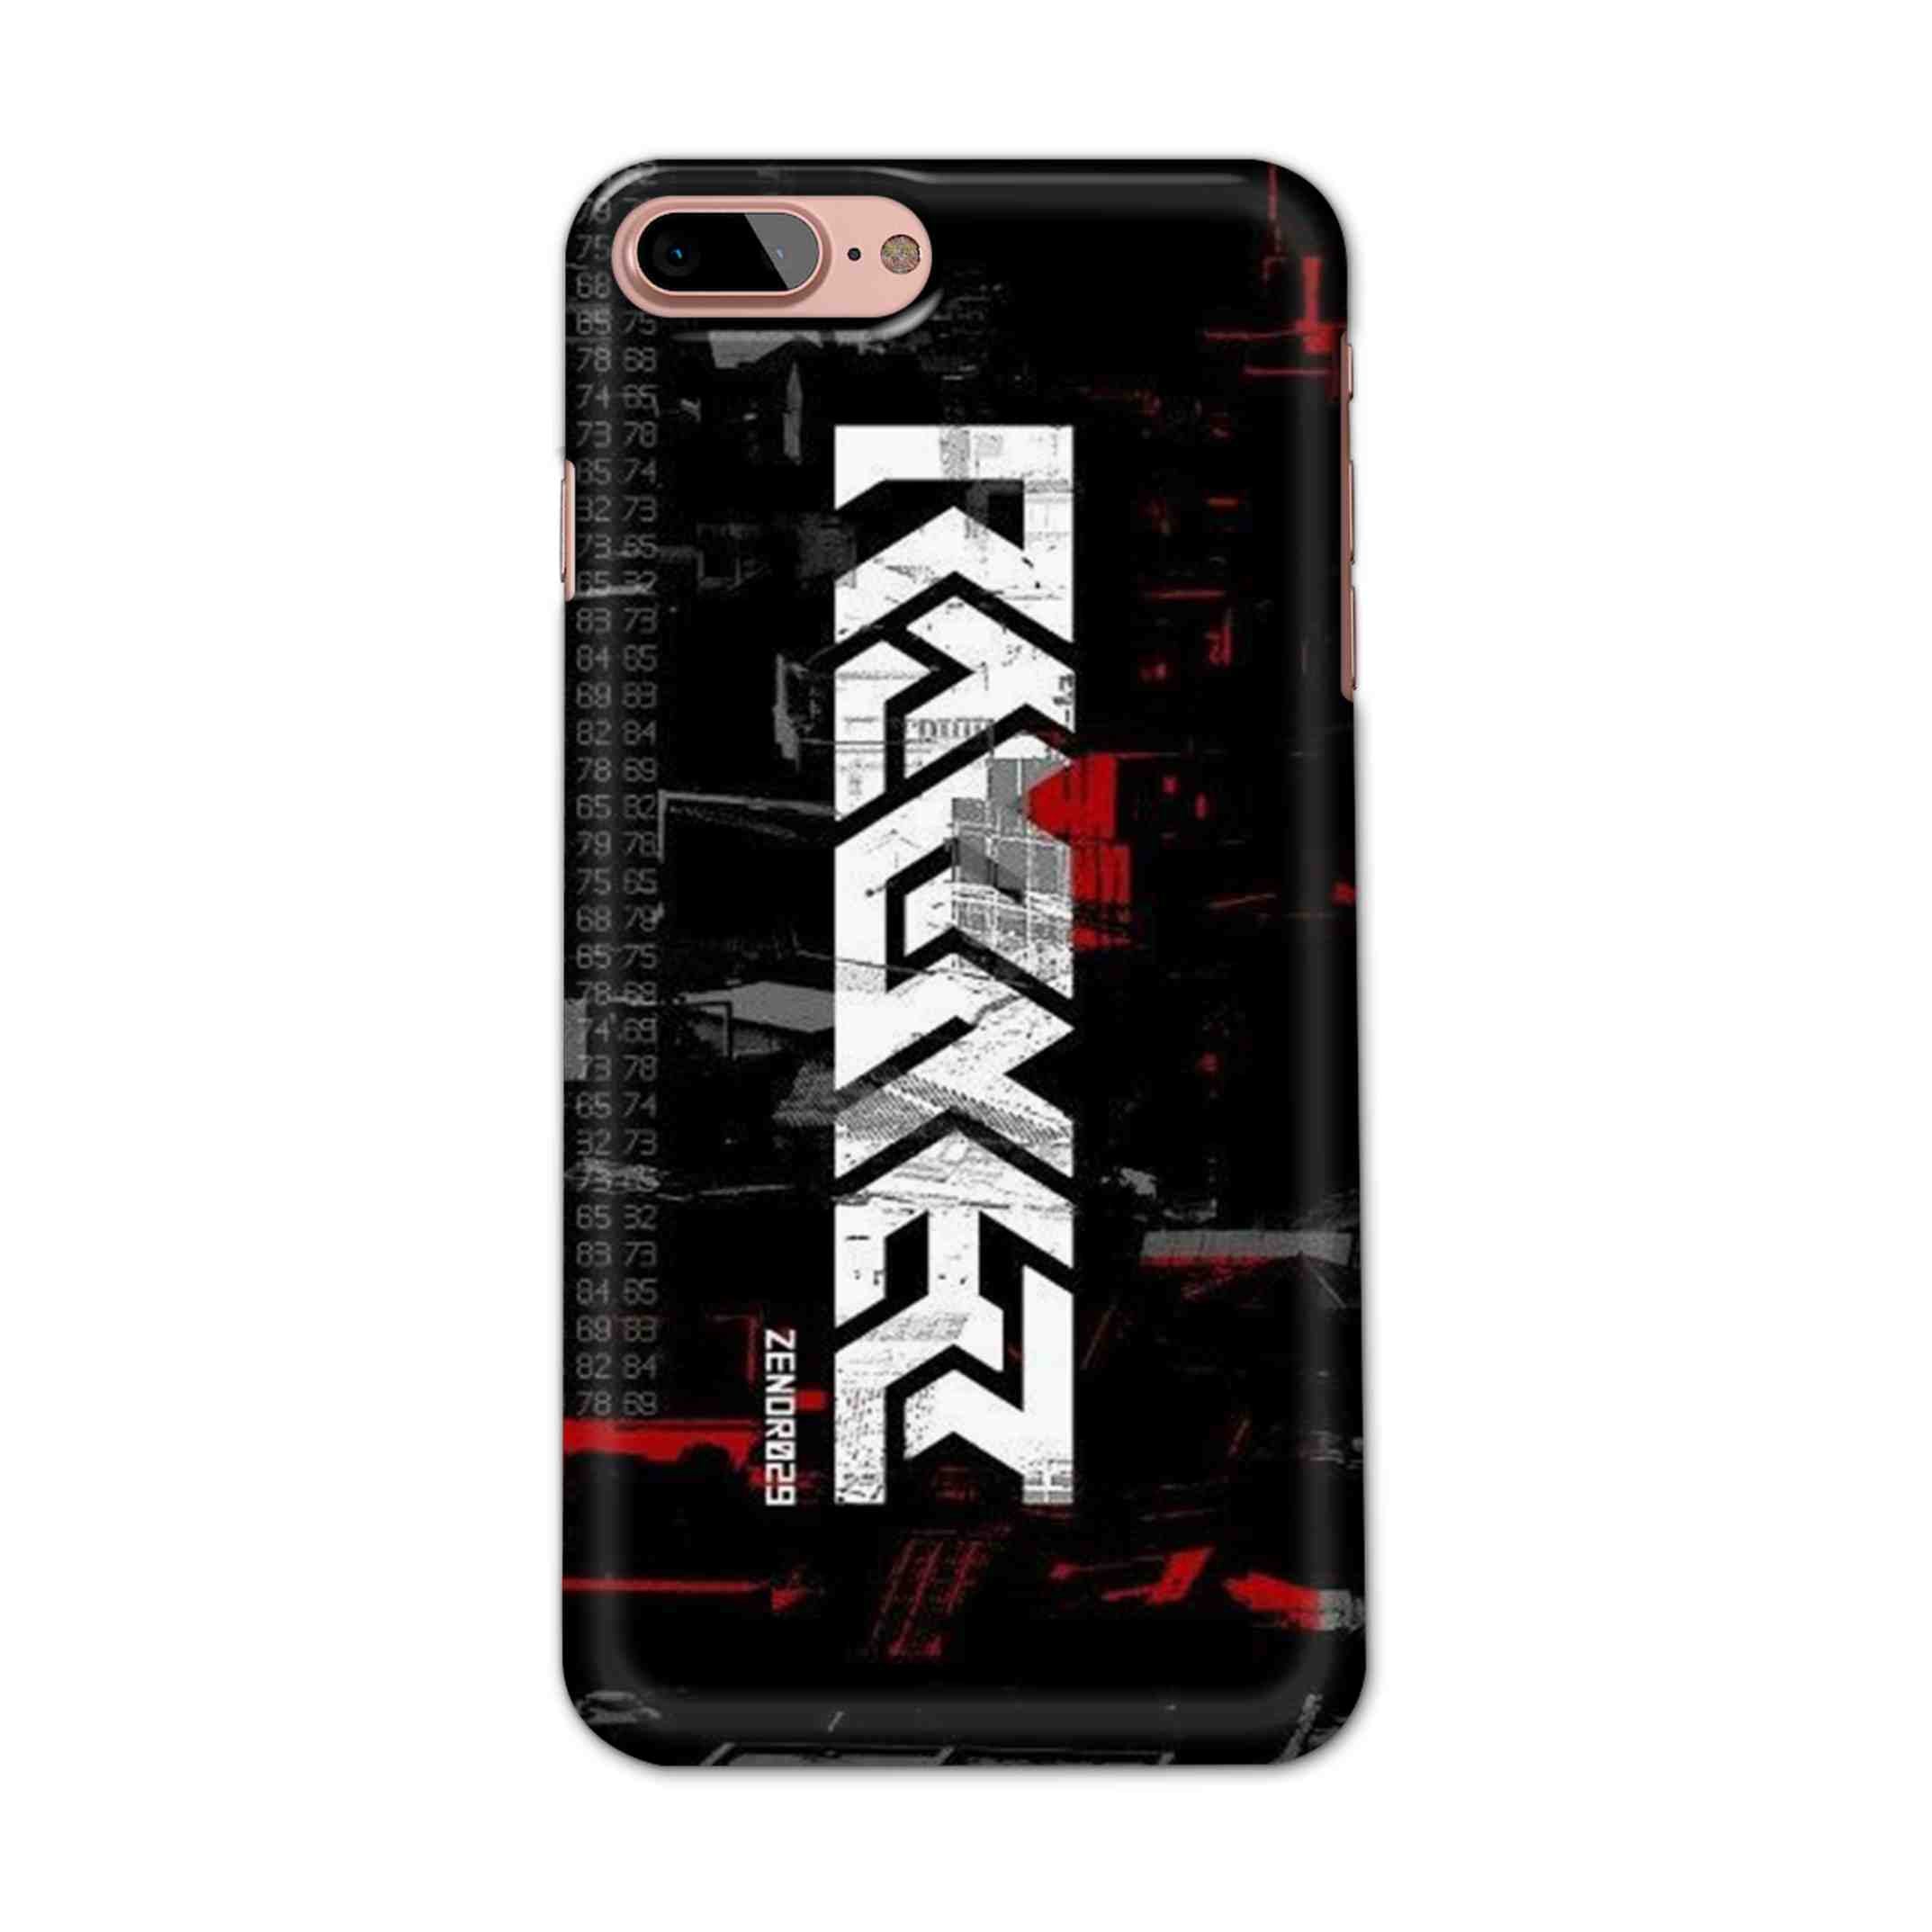 Buy Raxer Hard Back Mobile Phone Case/Cover For iPhone 7 Plus / 8 Plus Online